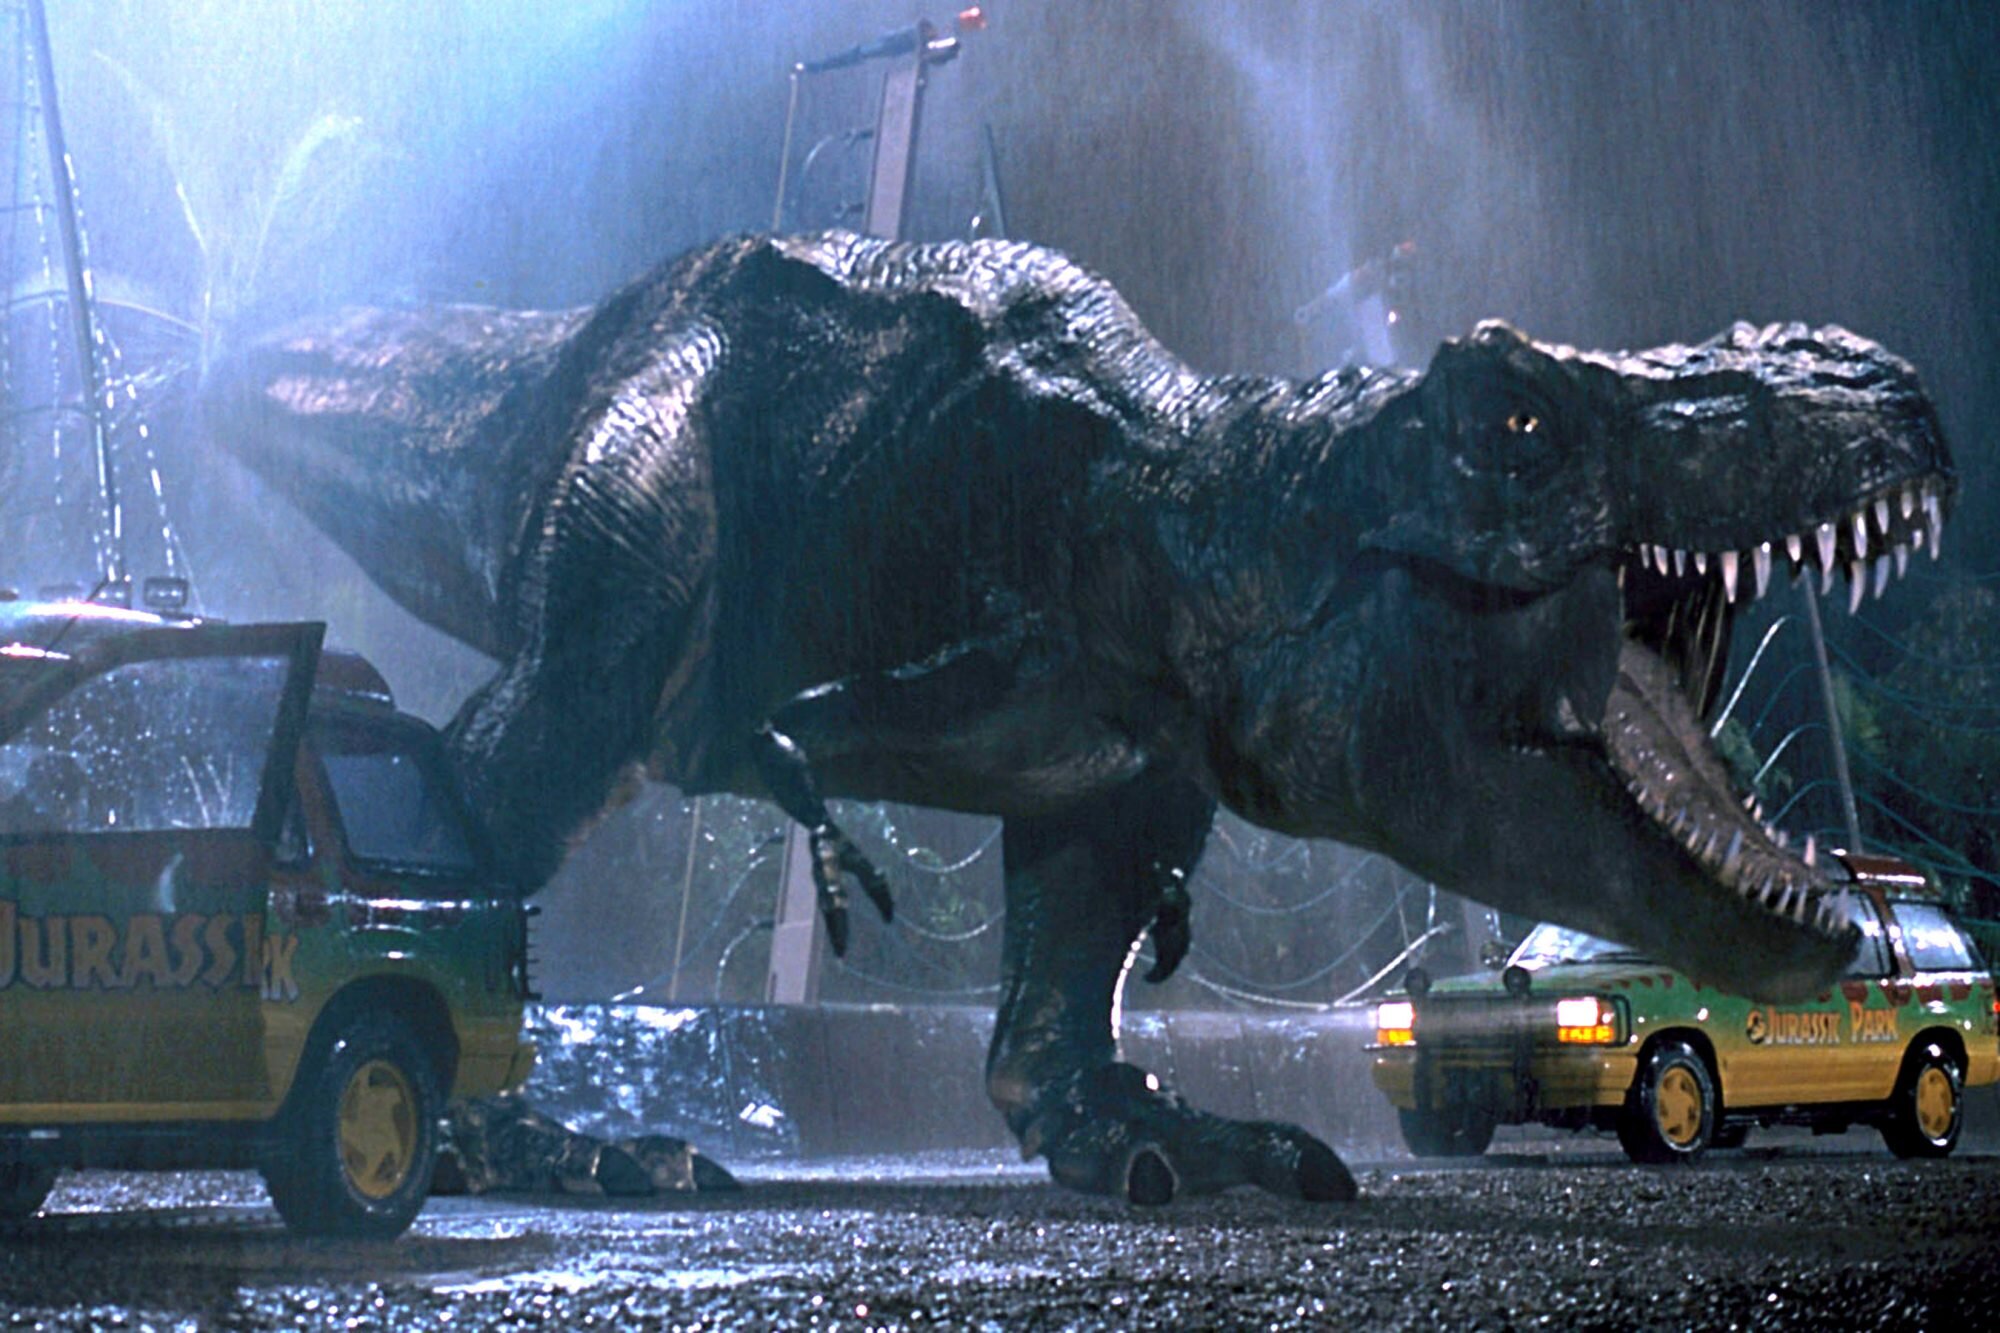 The tyrannosaurus rex after breaking out of his cage and roaring in between the two Jurassic Park cars.